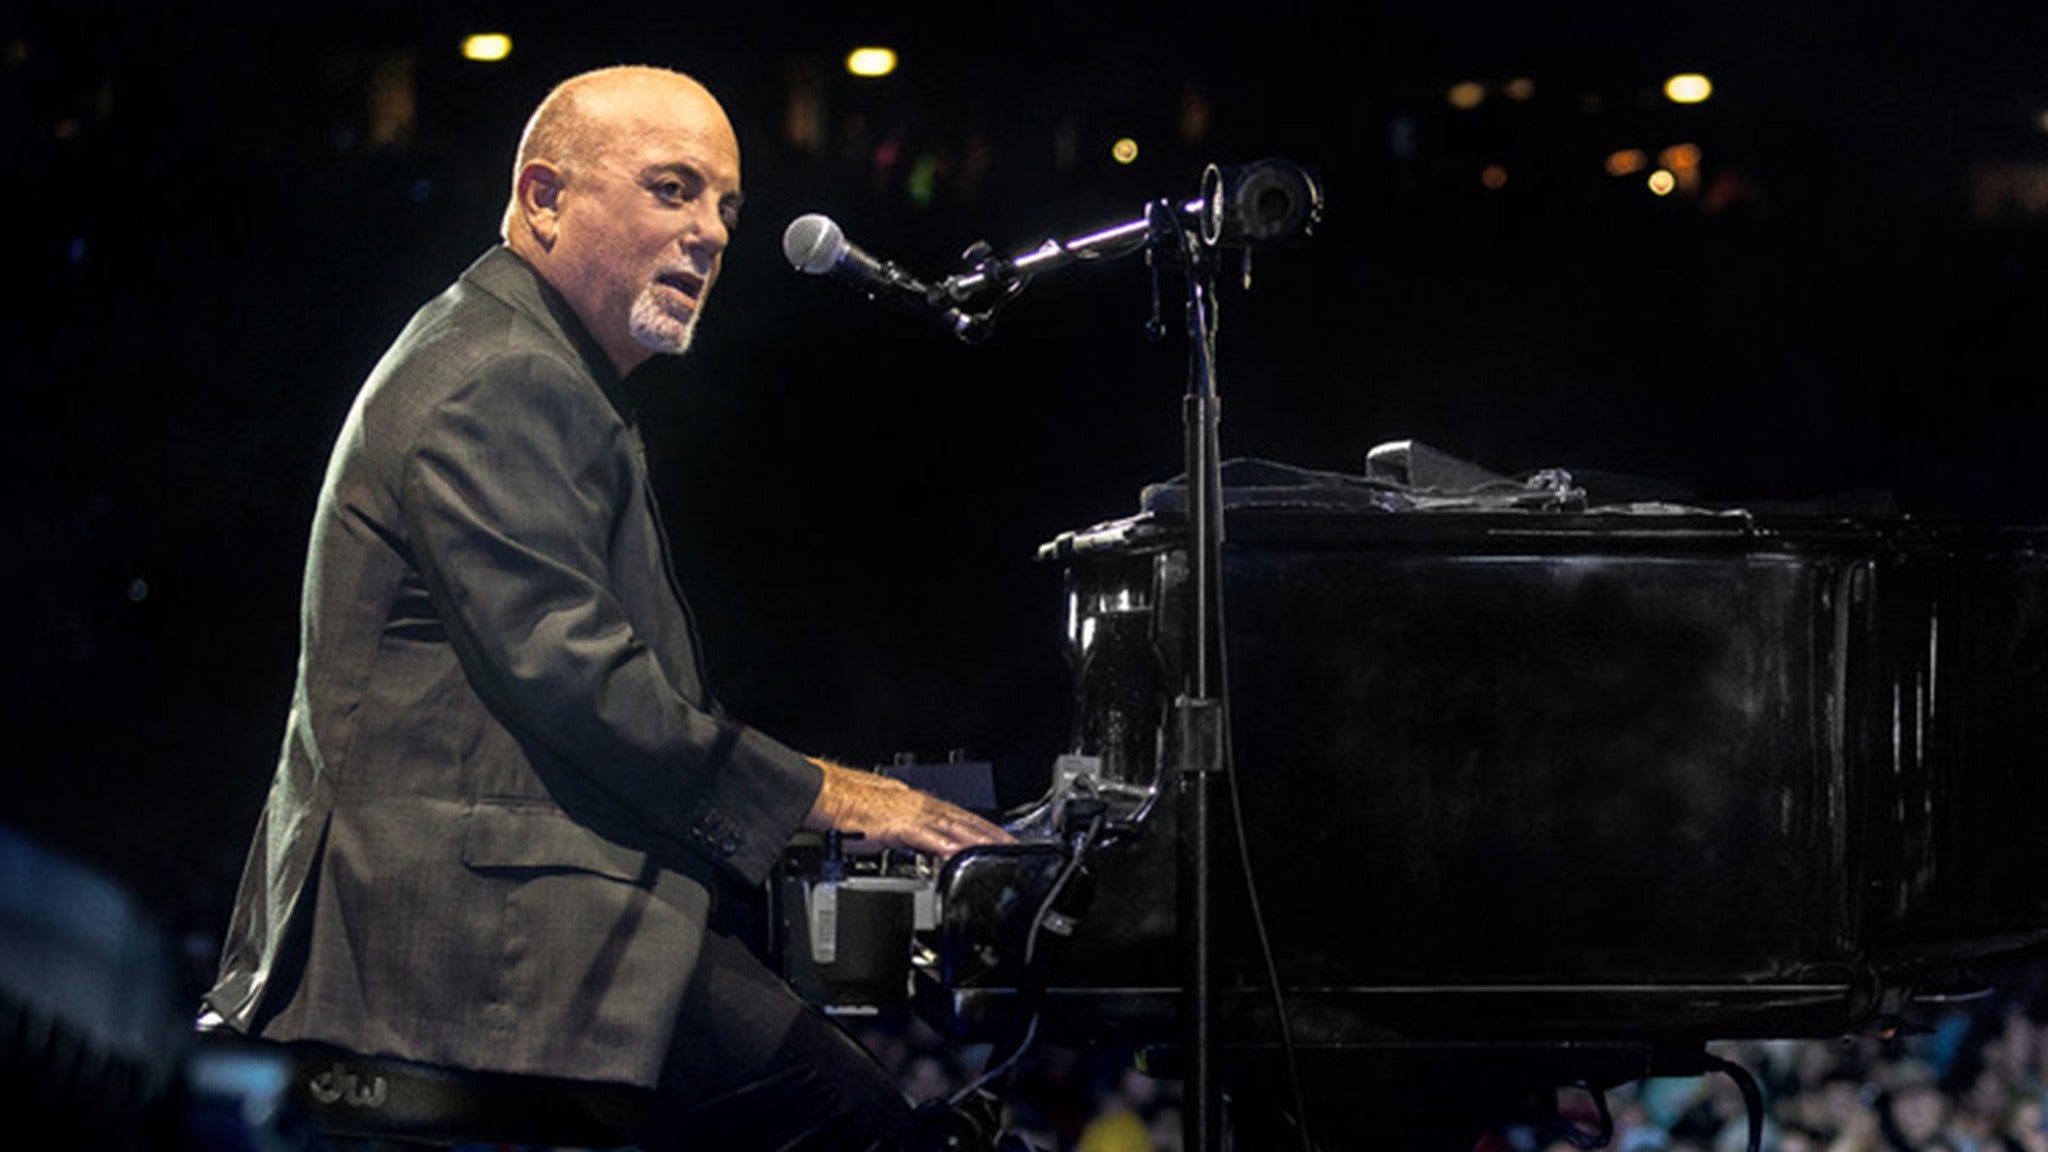 Image used with permission from Ticketmaster | Billy Joel: In Concert, For One Night tickets